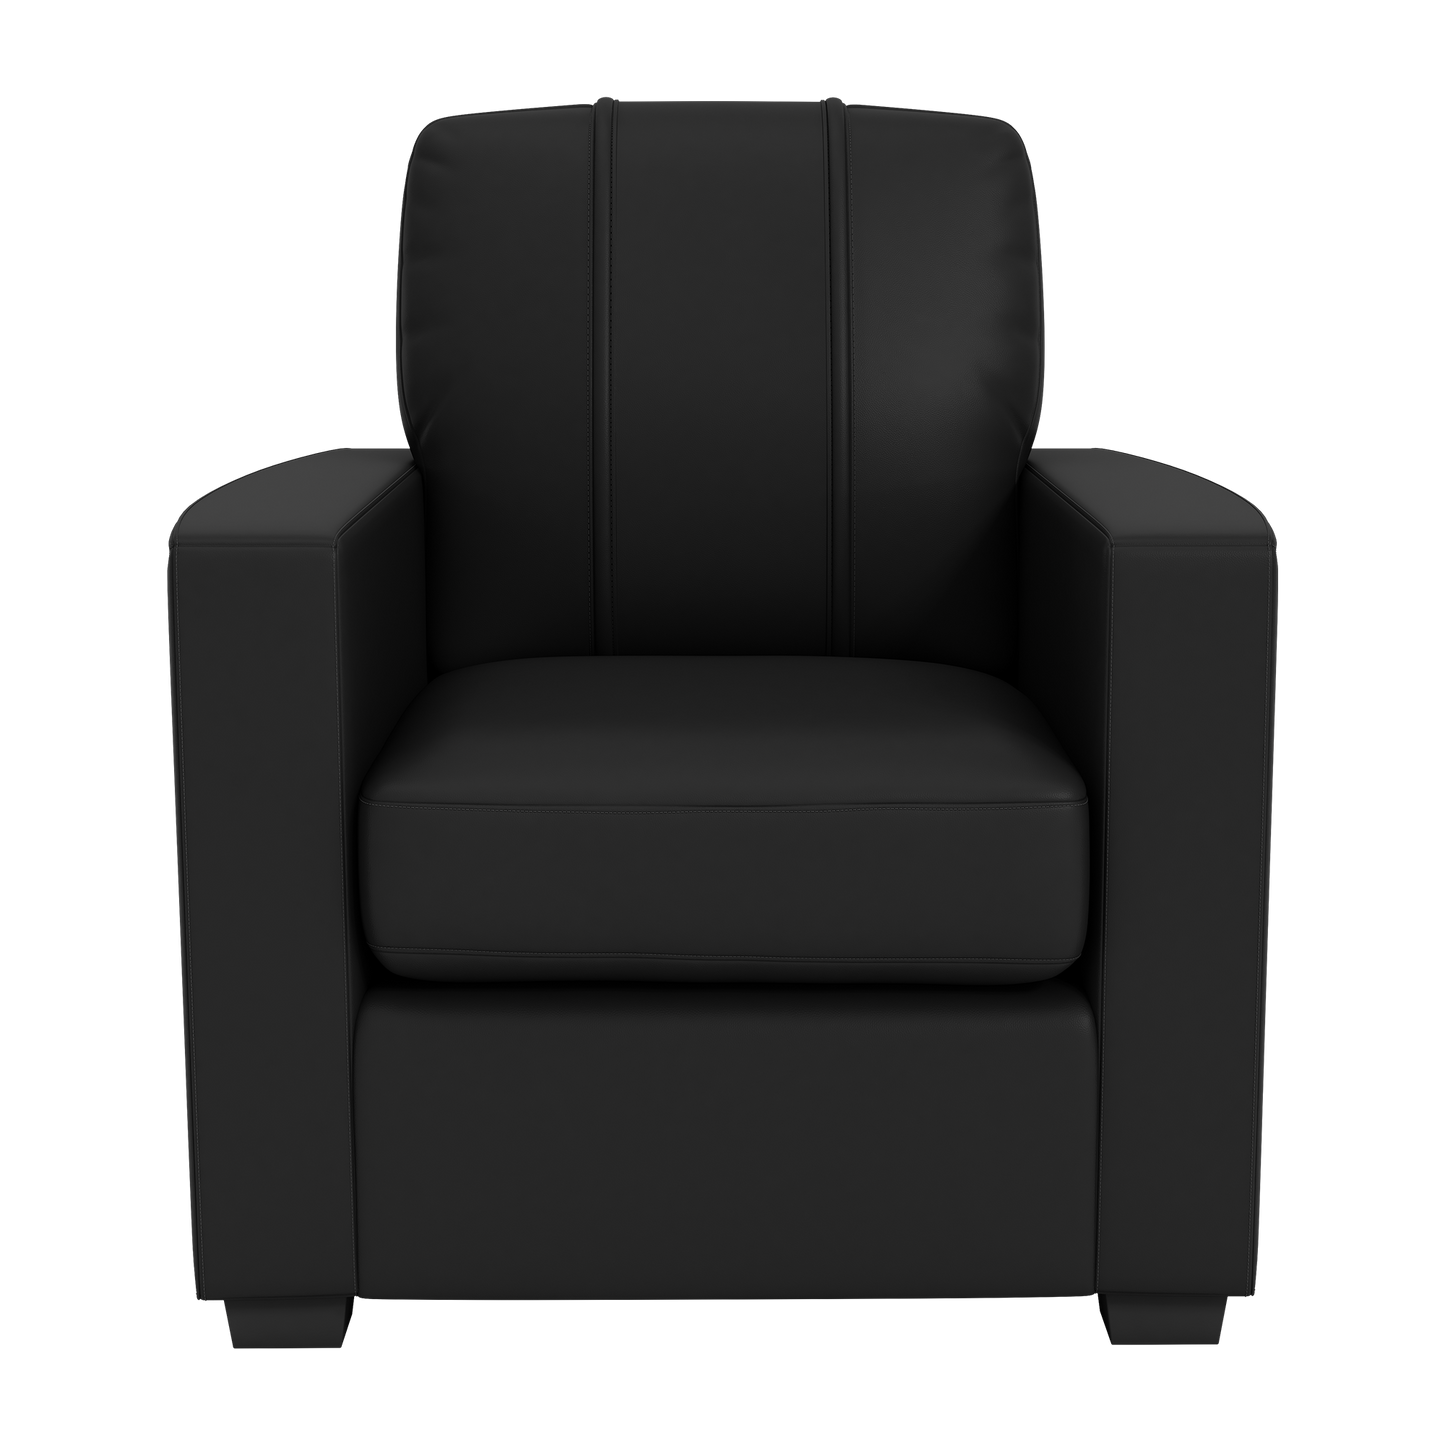 Silver Club Chair with Vanderbilt Commodores Secondary